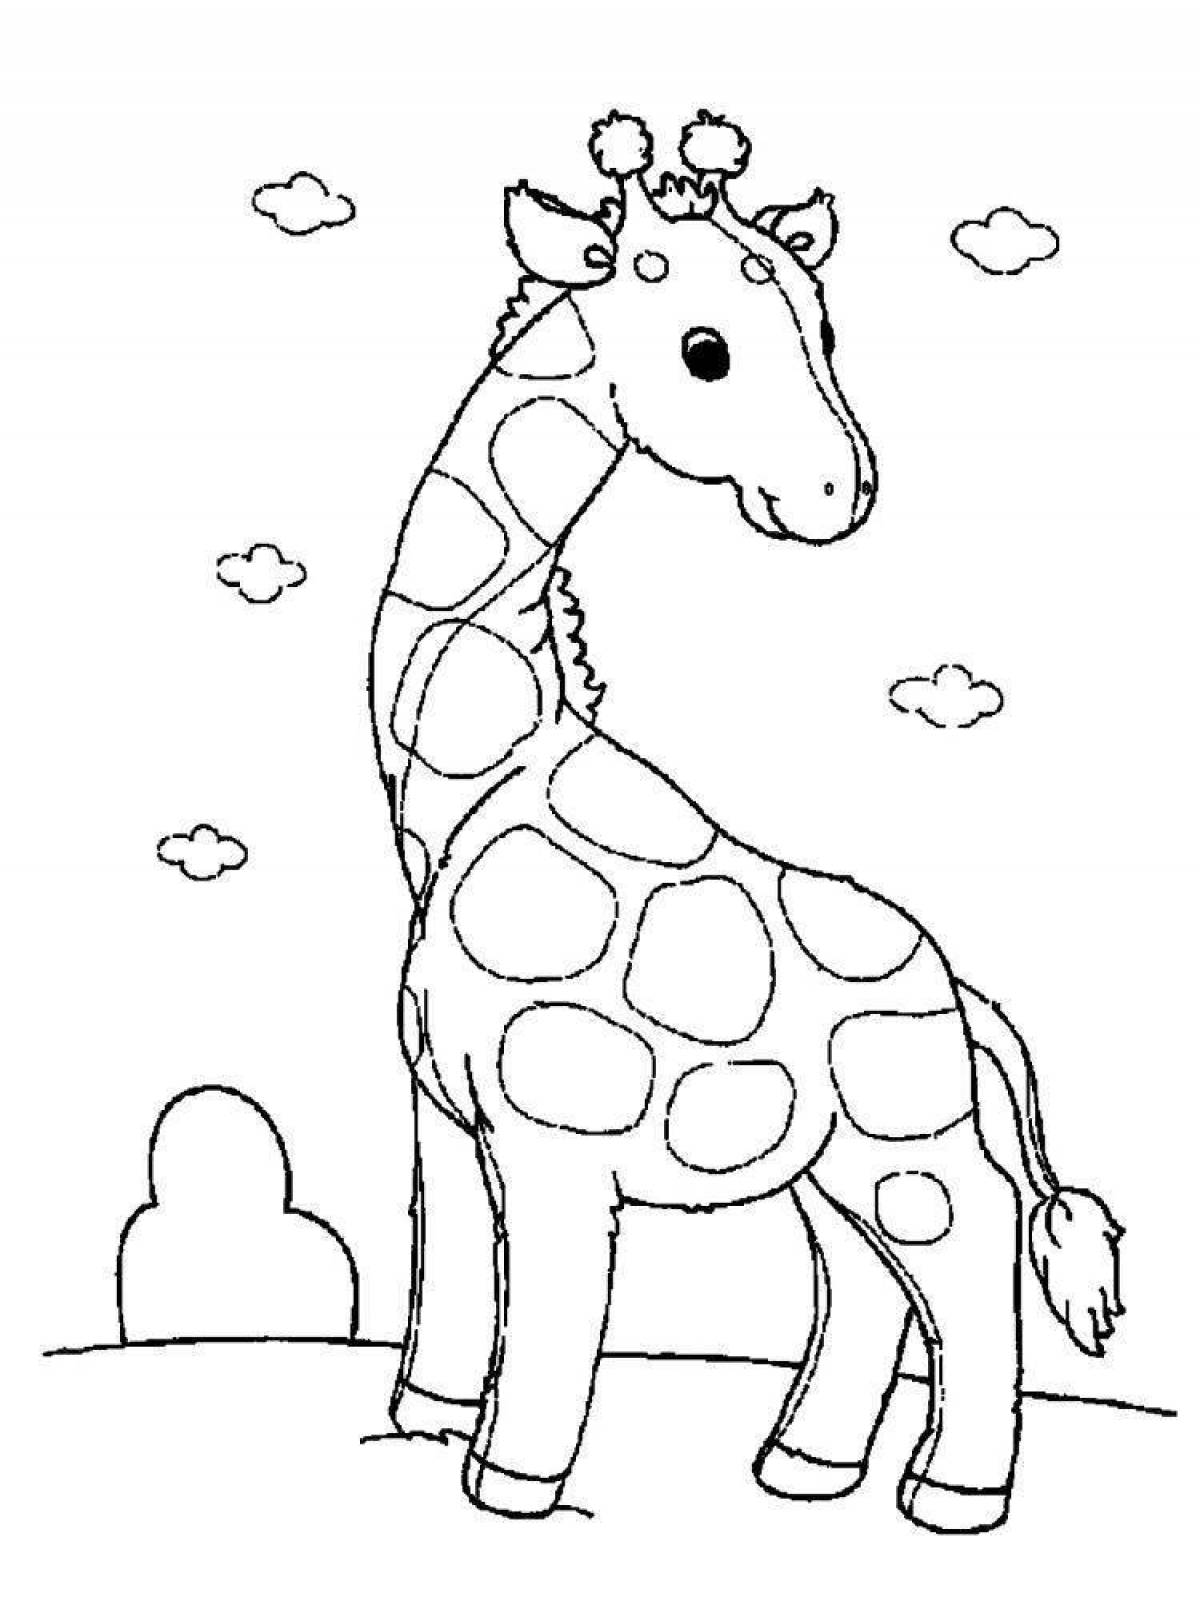 Cute giraffe coloring book for 3-4 year olds